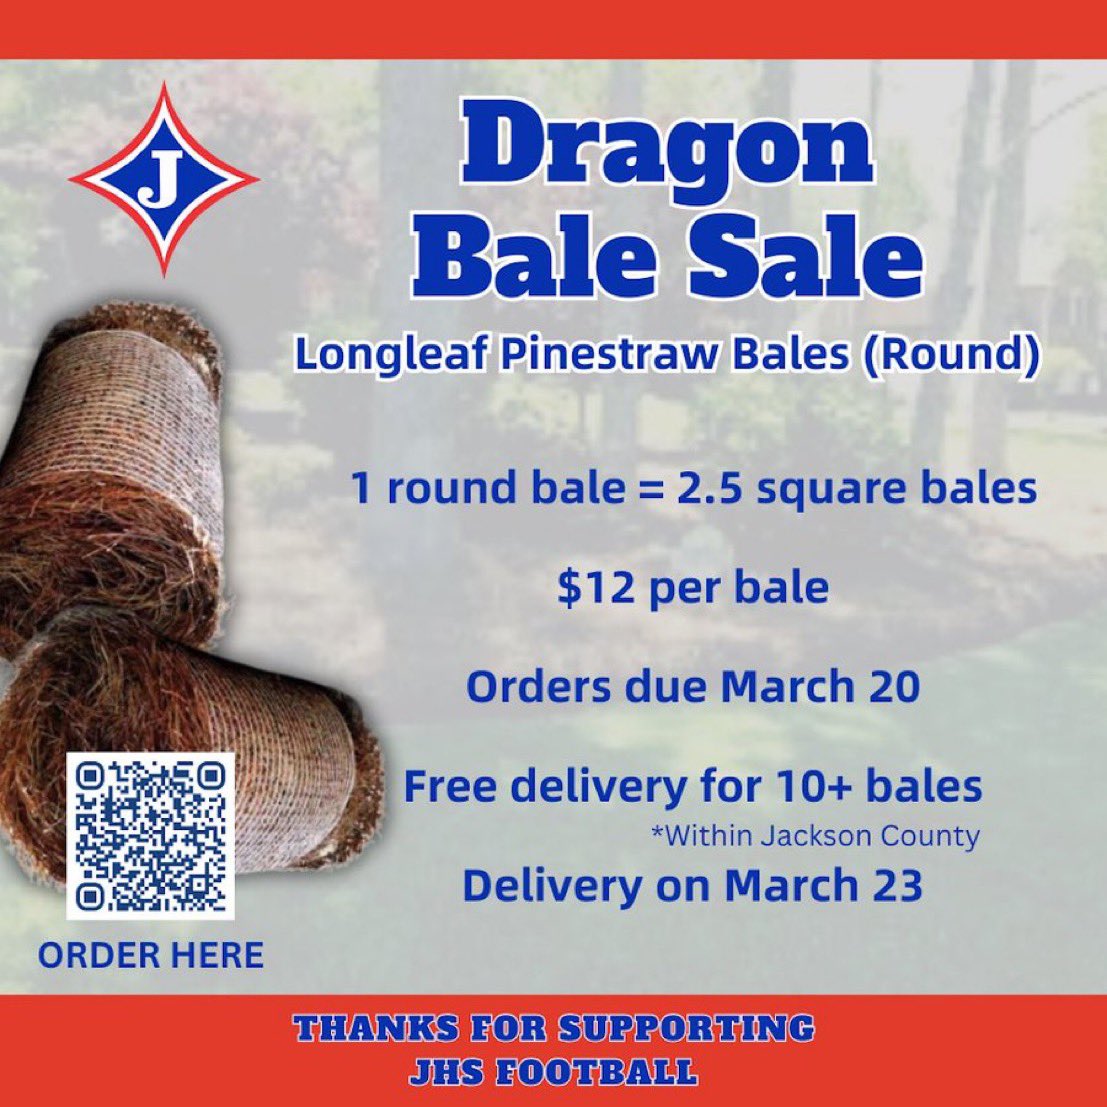 Dragon Nation! The Bale Sales will close SOON! Get your pine at straw ordered today! The Dragons are bringing you fresh pine straw just in time for early spring yard work!   ·         Round bales (equivalent to 2.5 square bales) are available at $12 each. ·         Free